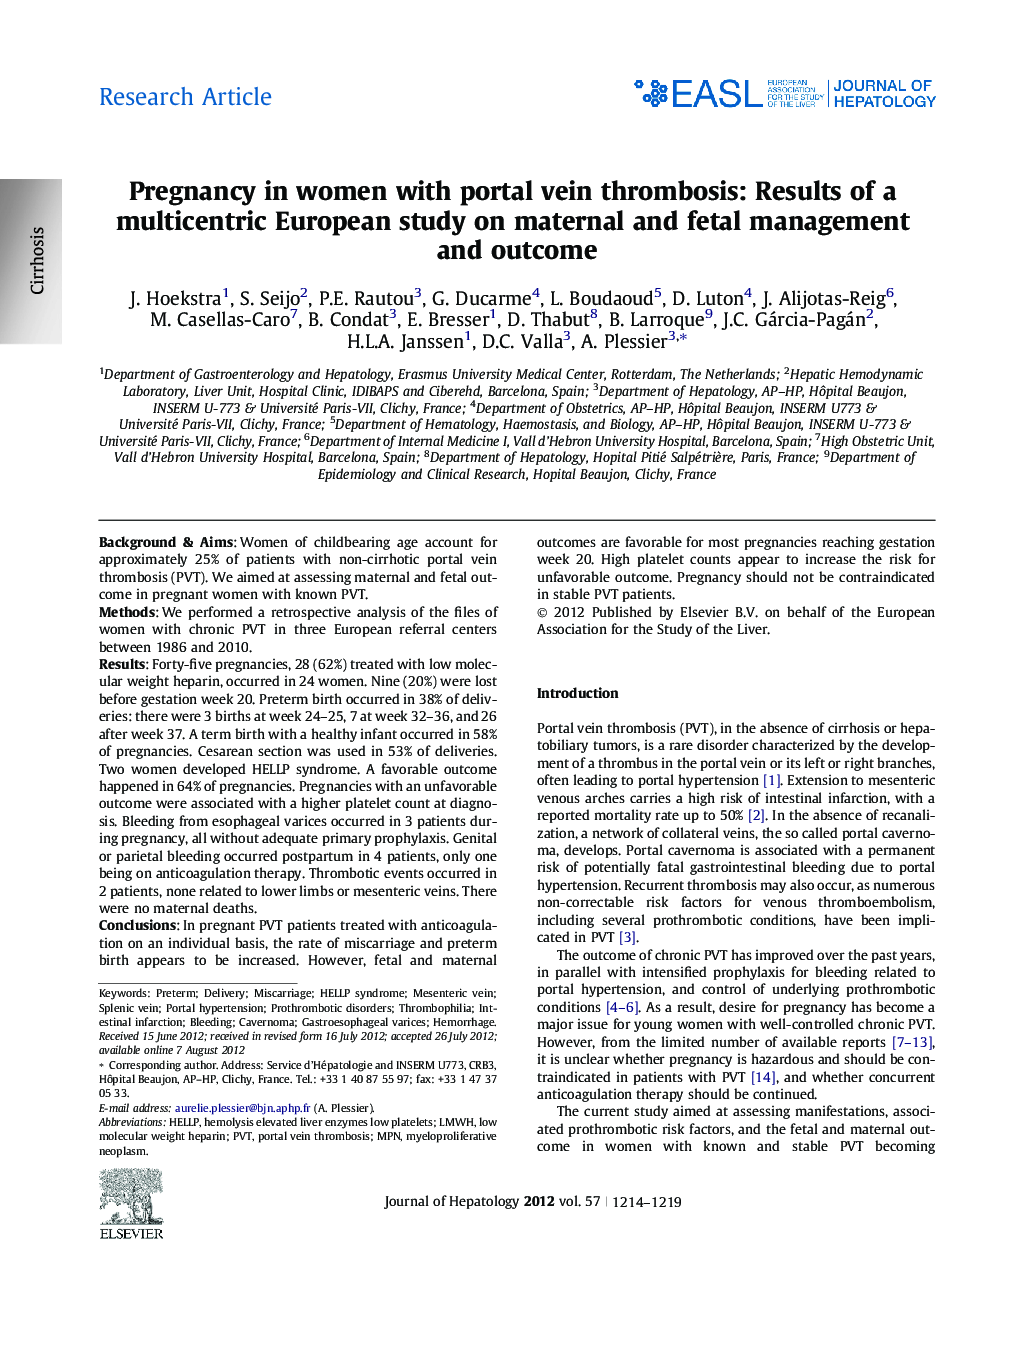 Research ArticlePregnancy in women with portal vein thrombosis: Results of a multicentric European study on maternal and fetal management and outcome